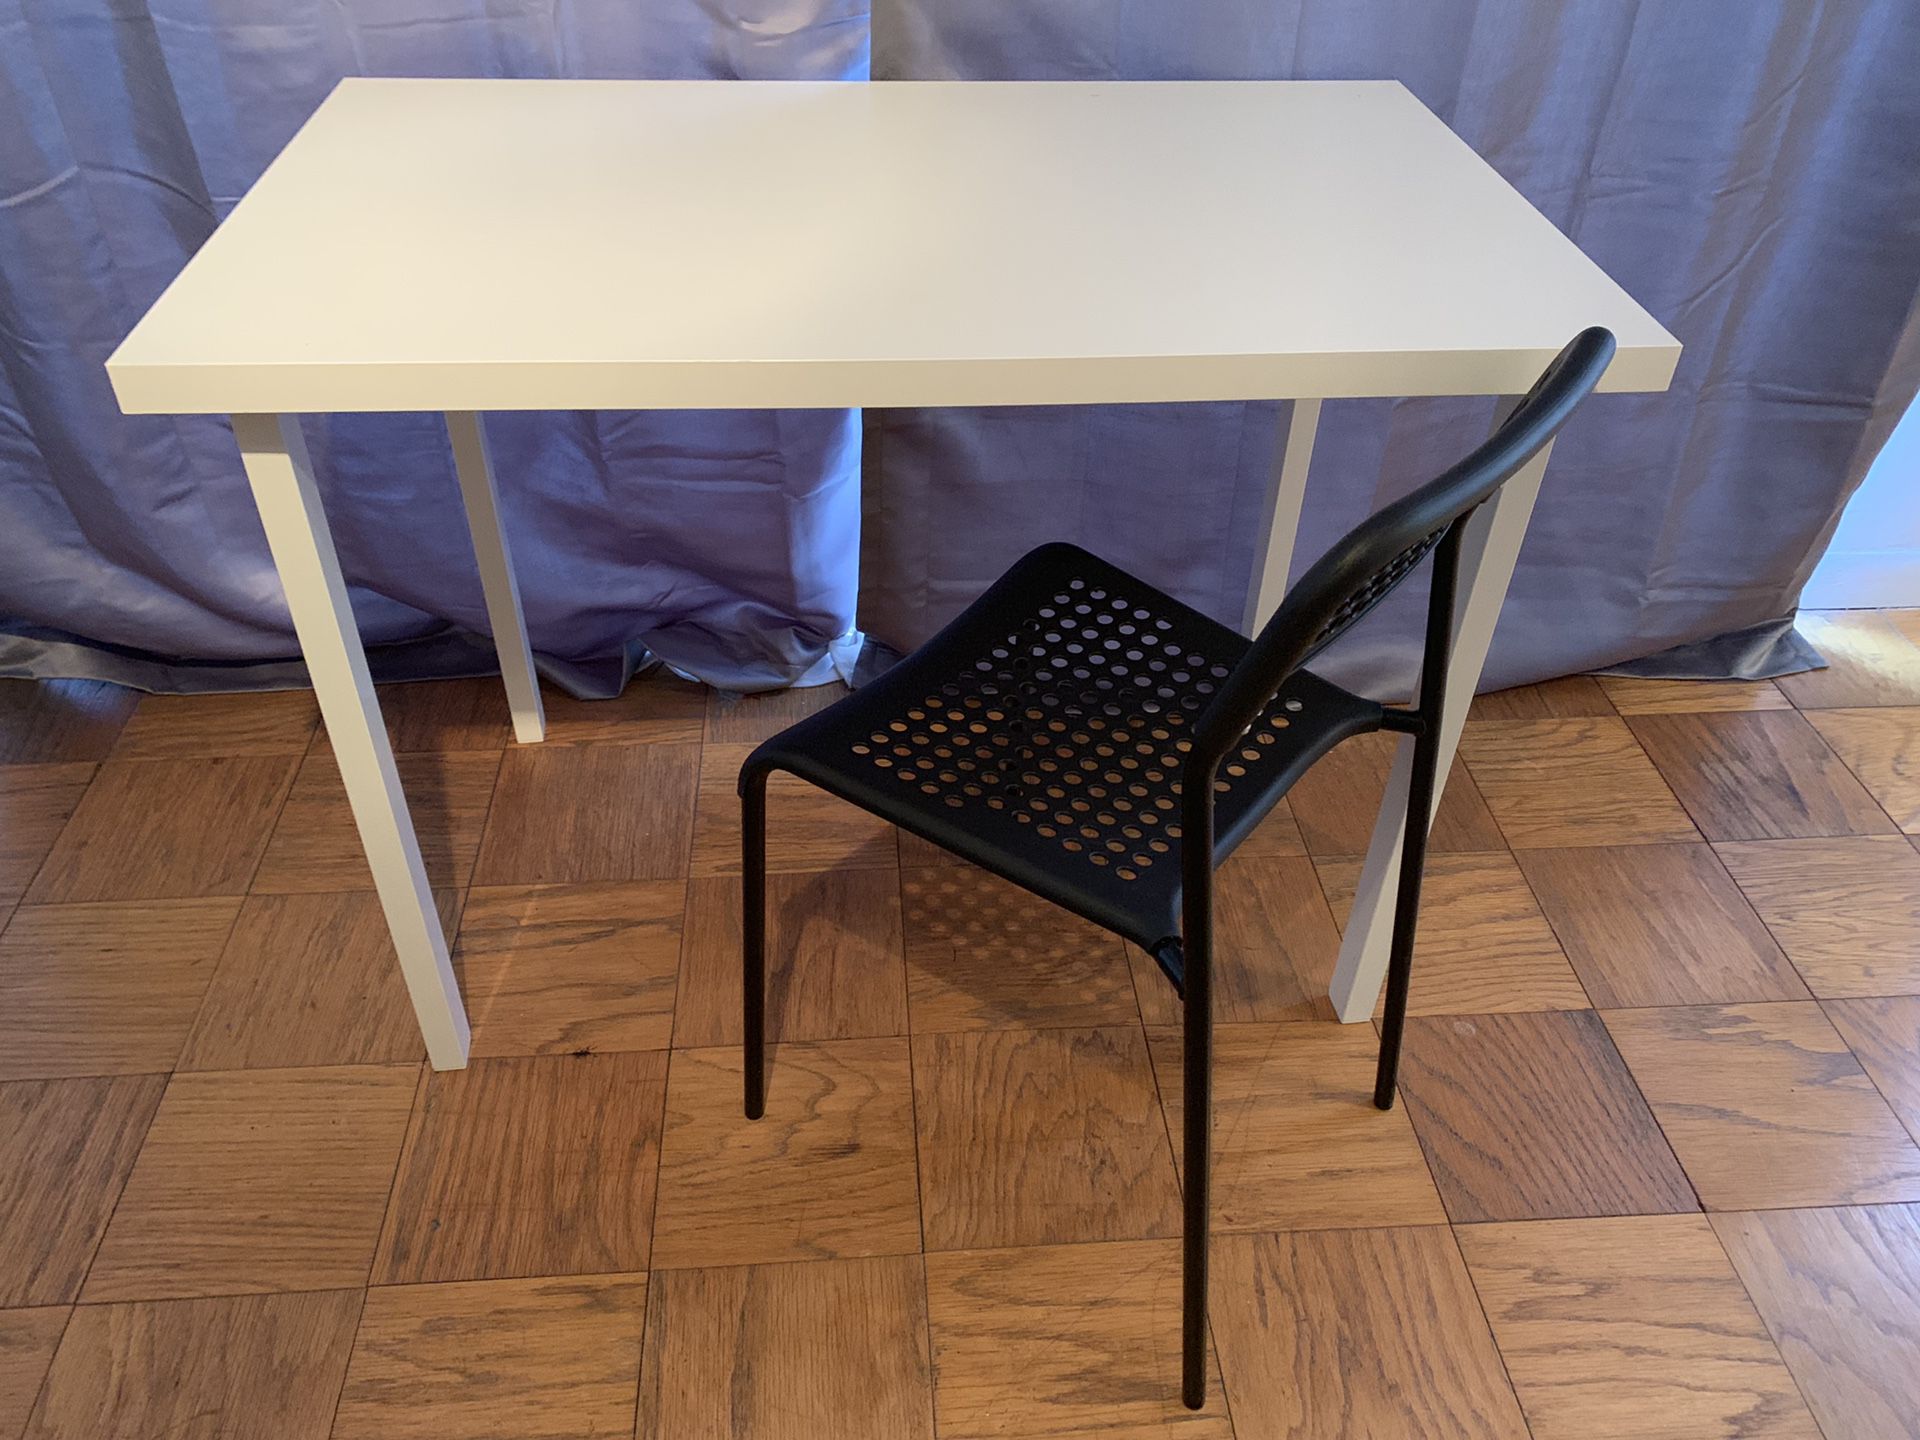 MOVING SALE!! IKEA desk and chair. Originally $45, yours for $20!